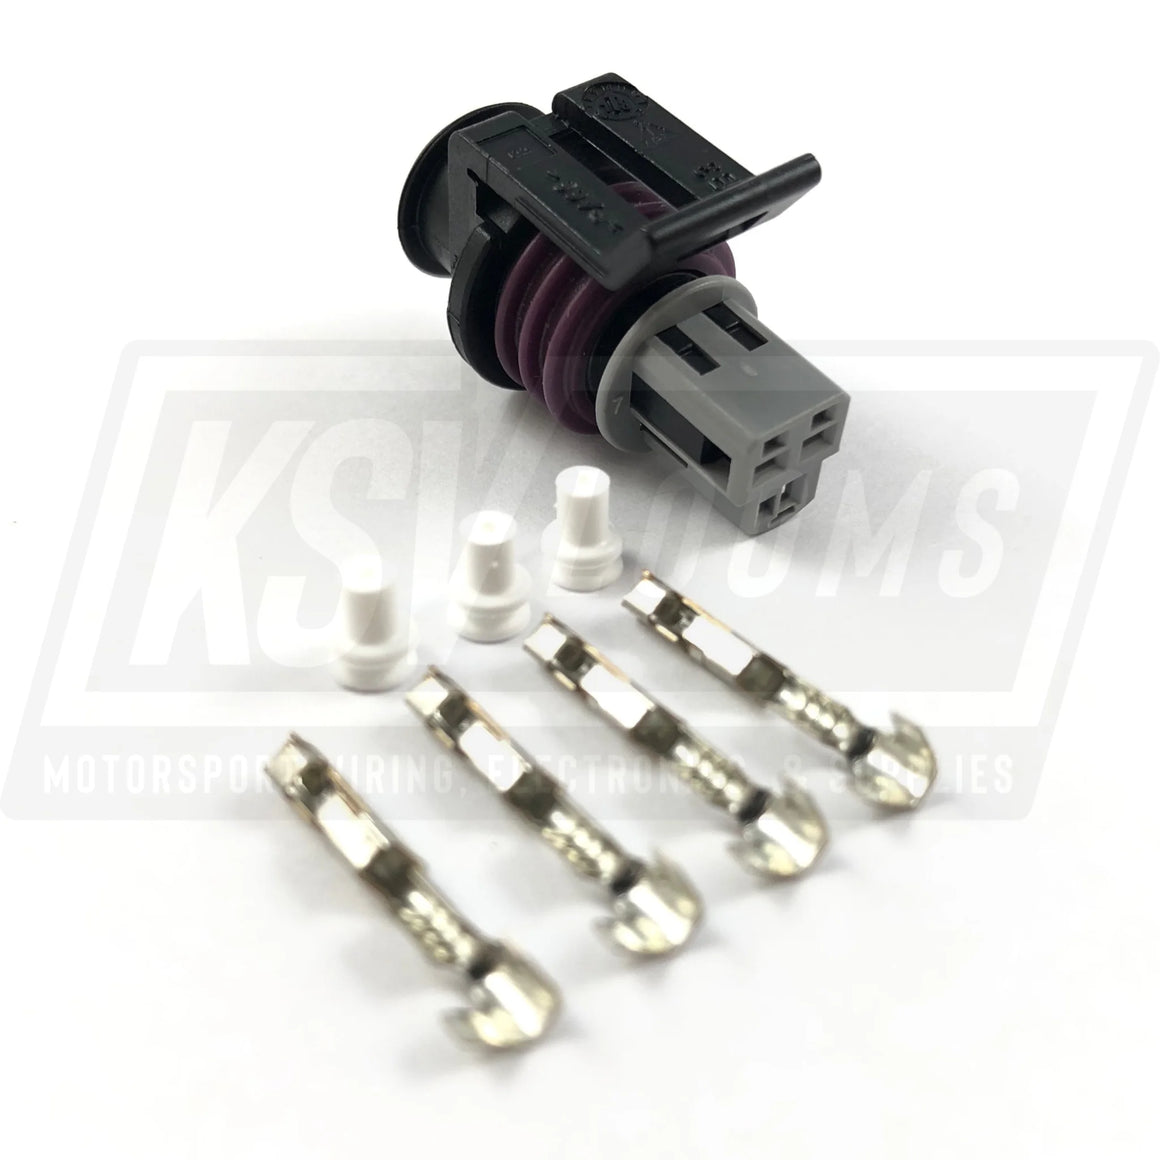 3-Way Connector Kit Same As Fueltech 5005100023 (22-20 Awg)